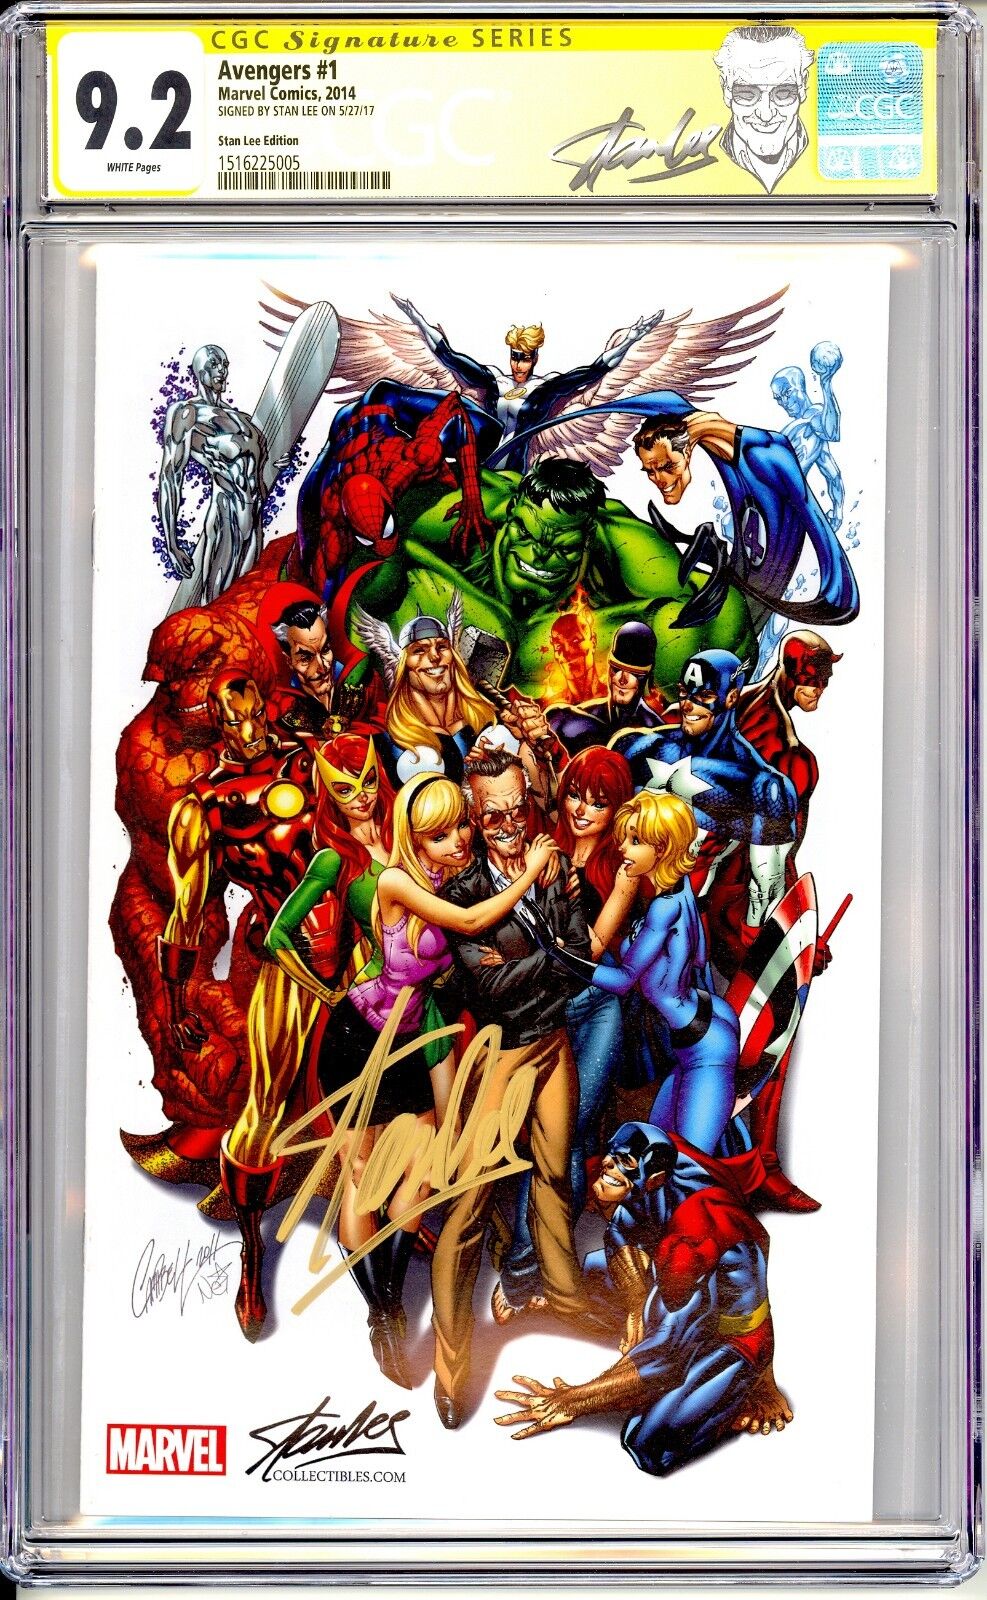 AVENGERS 1 SCOTT CAMPBELL VARIANT SDCC STAN LEE EDITION CGC SS 9.2 RARE STAN LEE